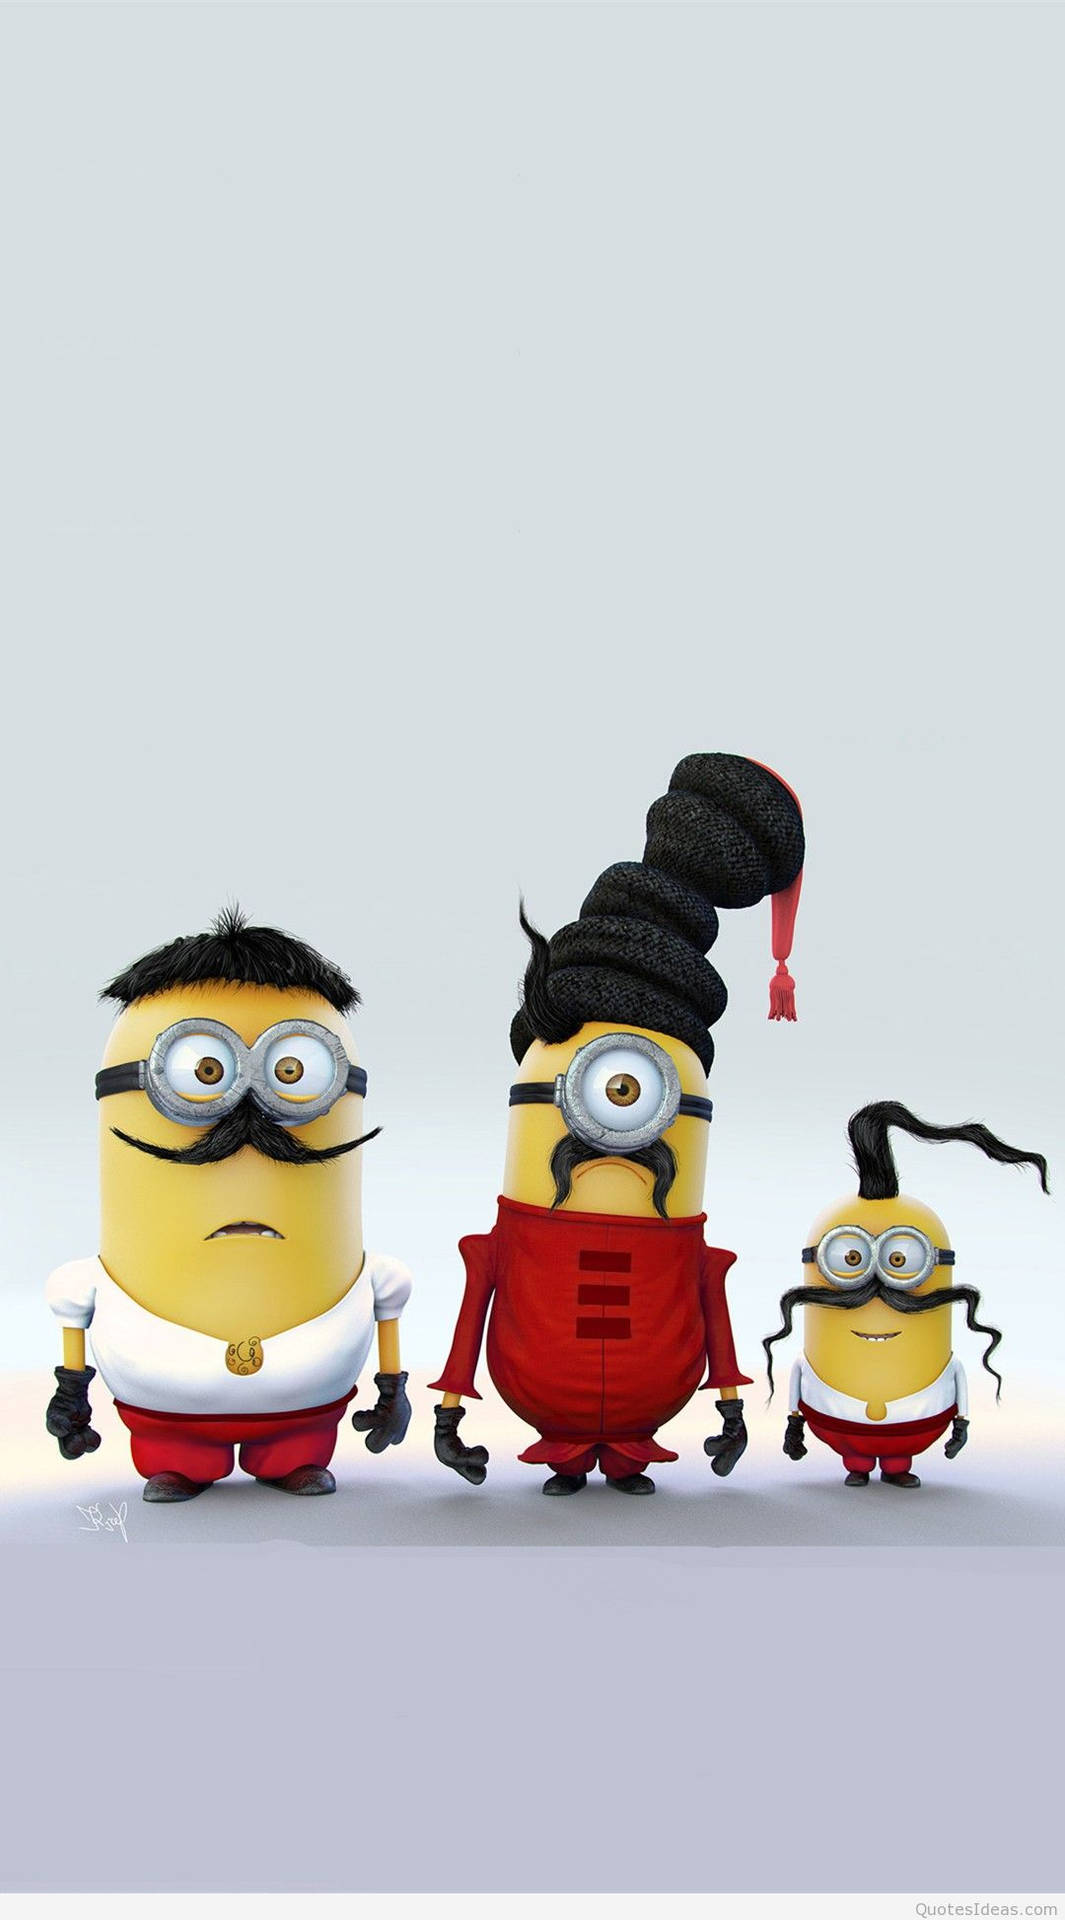 Enjoy your favorite tunes with Minion Phone! Wallpaper